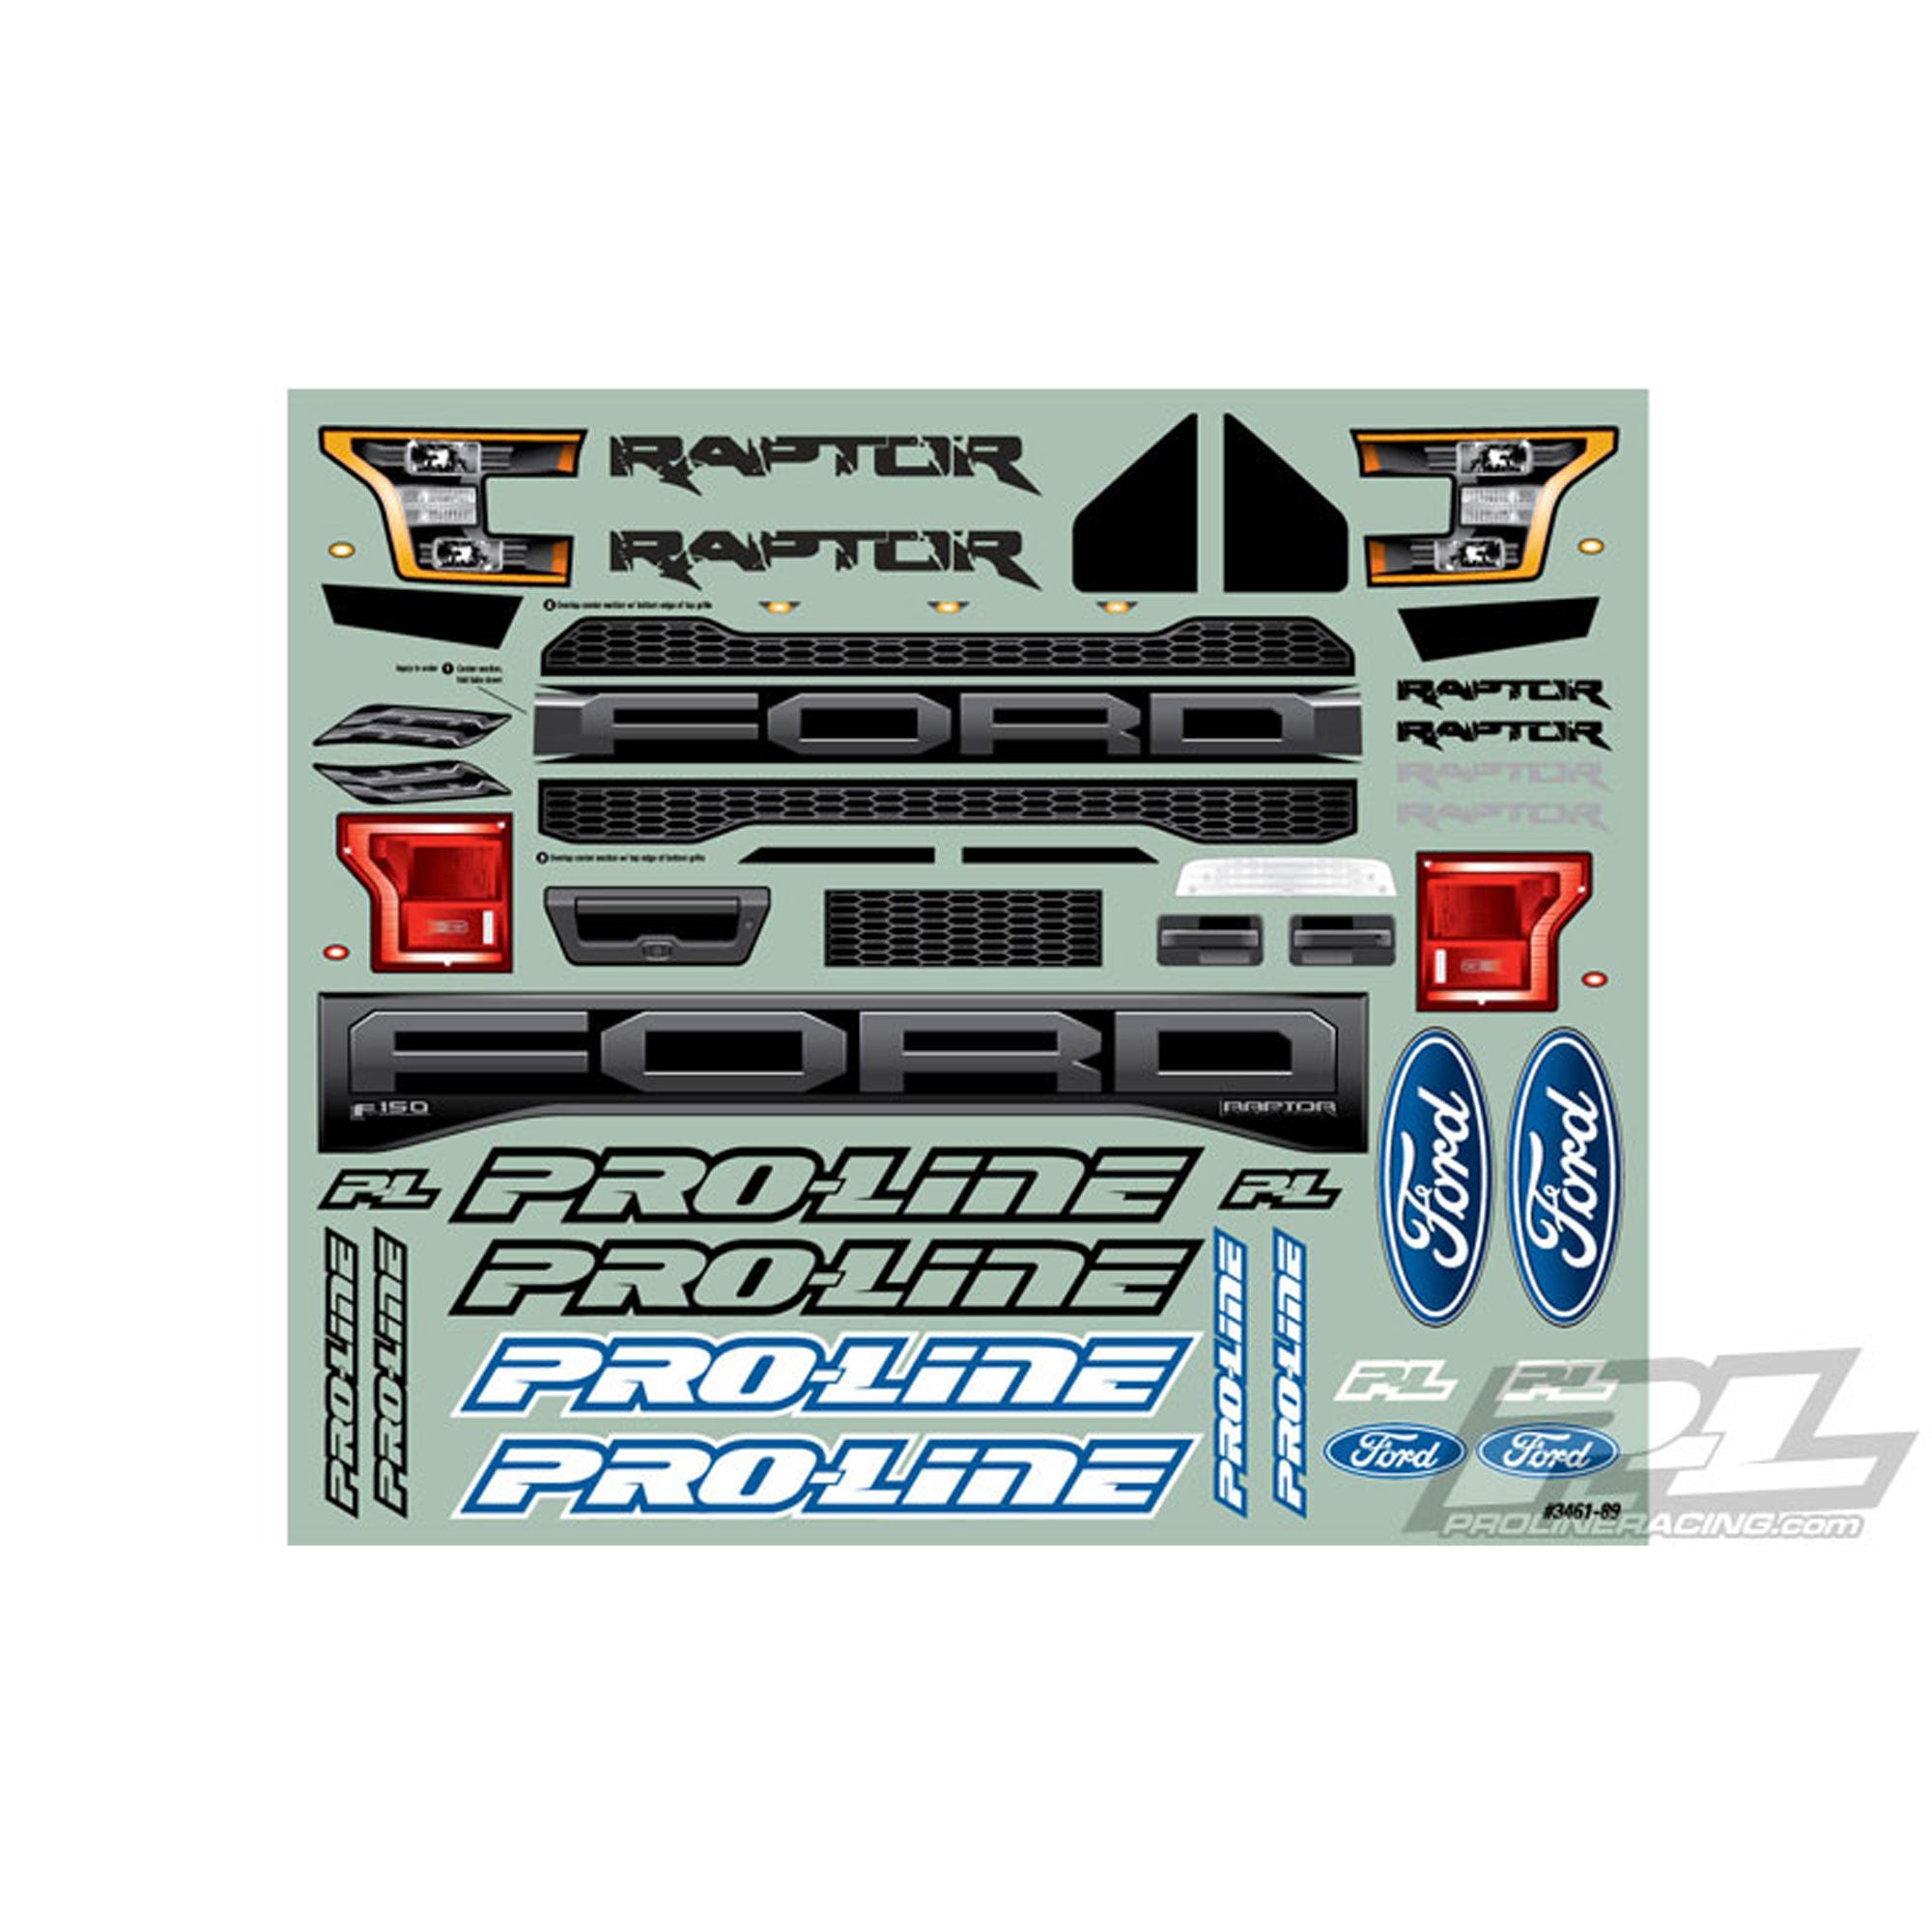 Pro-Line 1/10 2017 Ford F-150 Raptor True Scale Clear Body: Short Course